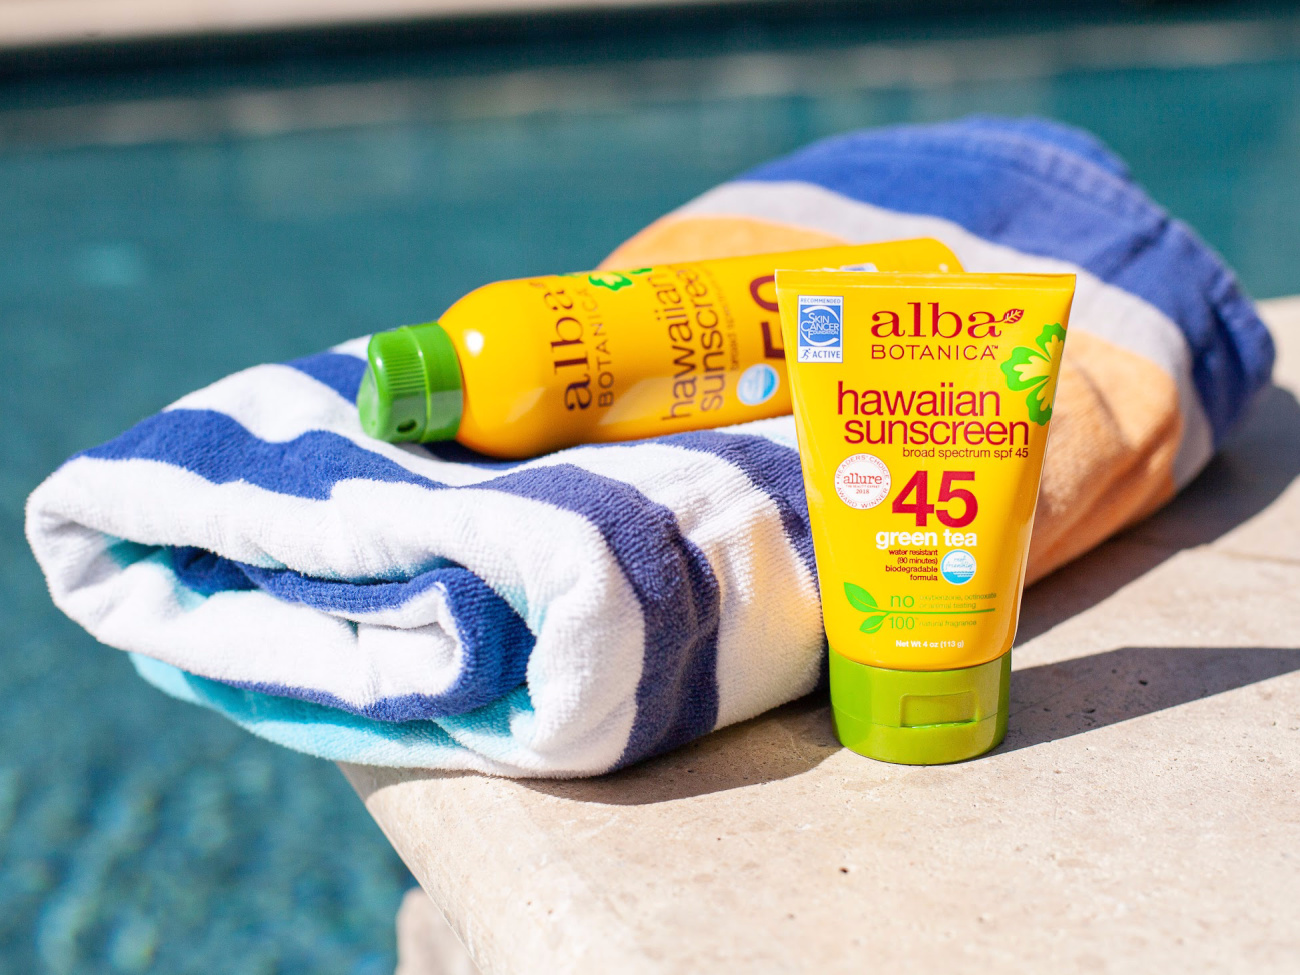 Get Out And Enjoy The Sun & Stay Protected With Alba Botanica on I Heart Publix